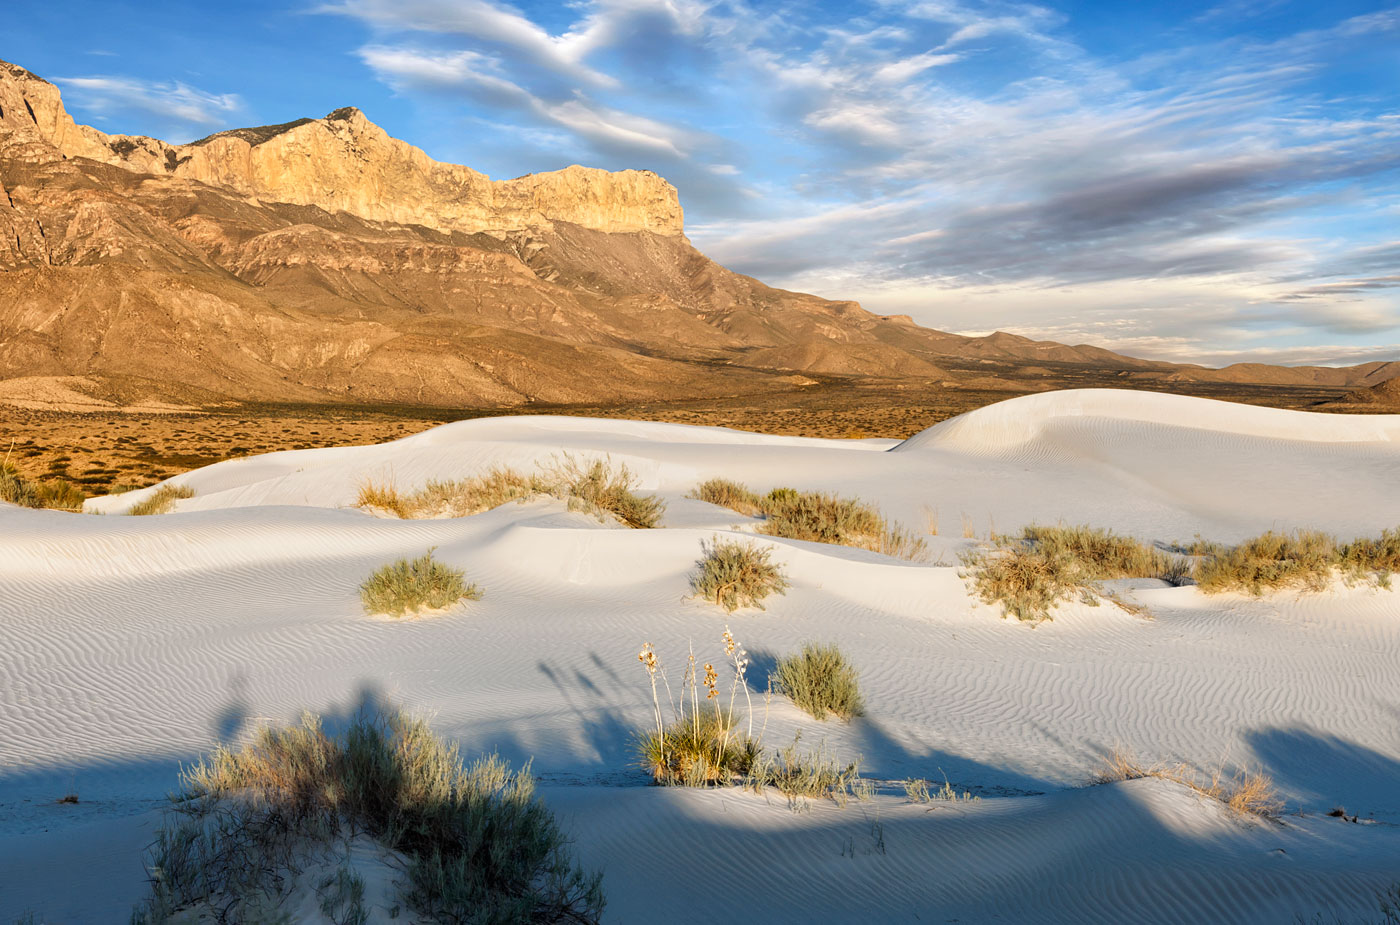 Guadalupe-Mountains-National-Park-ABP-Guadalupe-Mountains-National-Park-ABP-Gypsum-Dunes.jpg